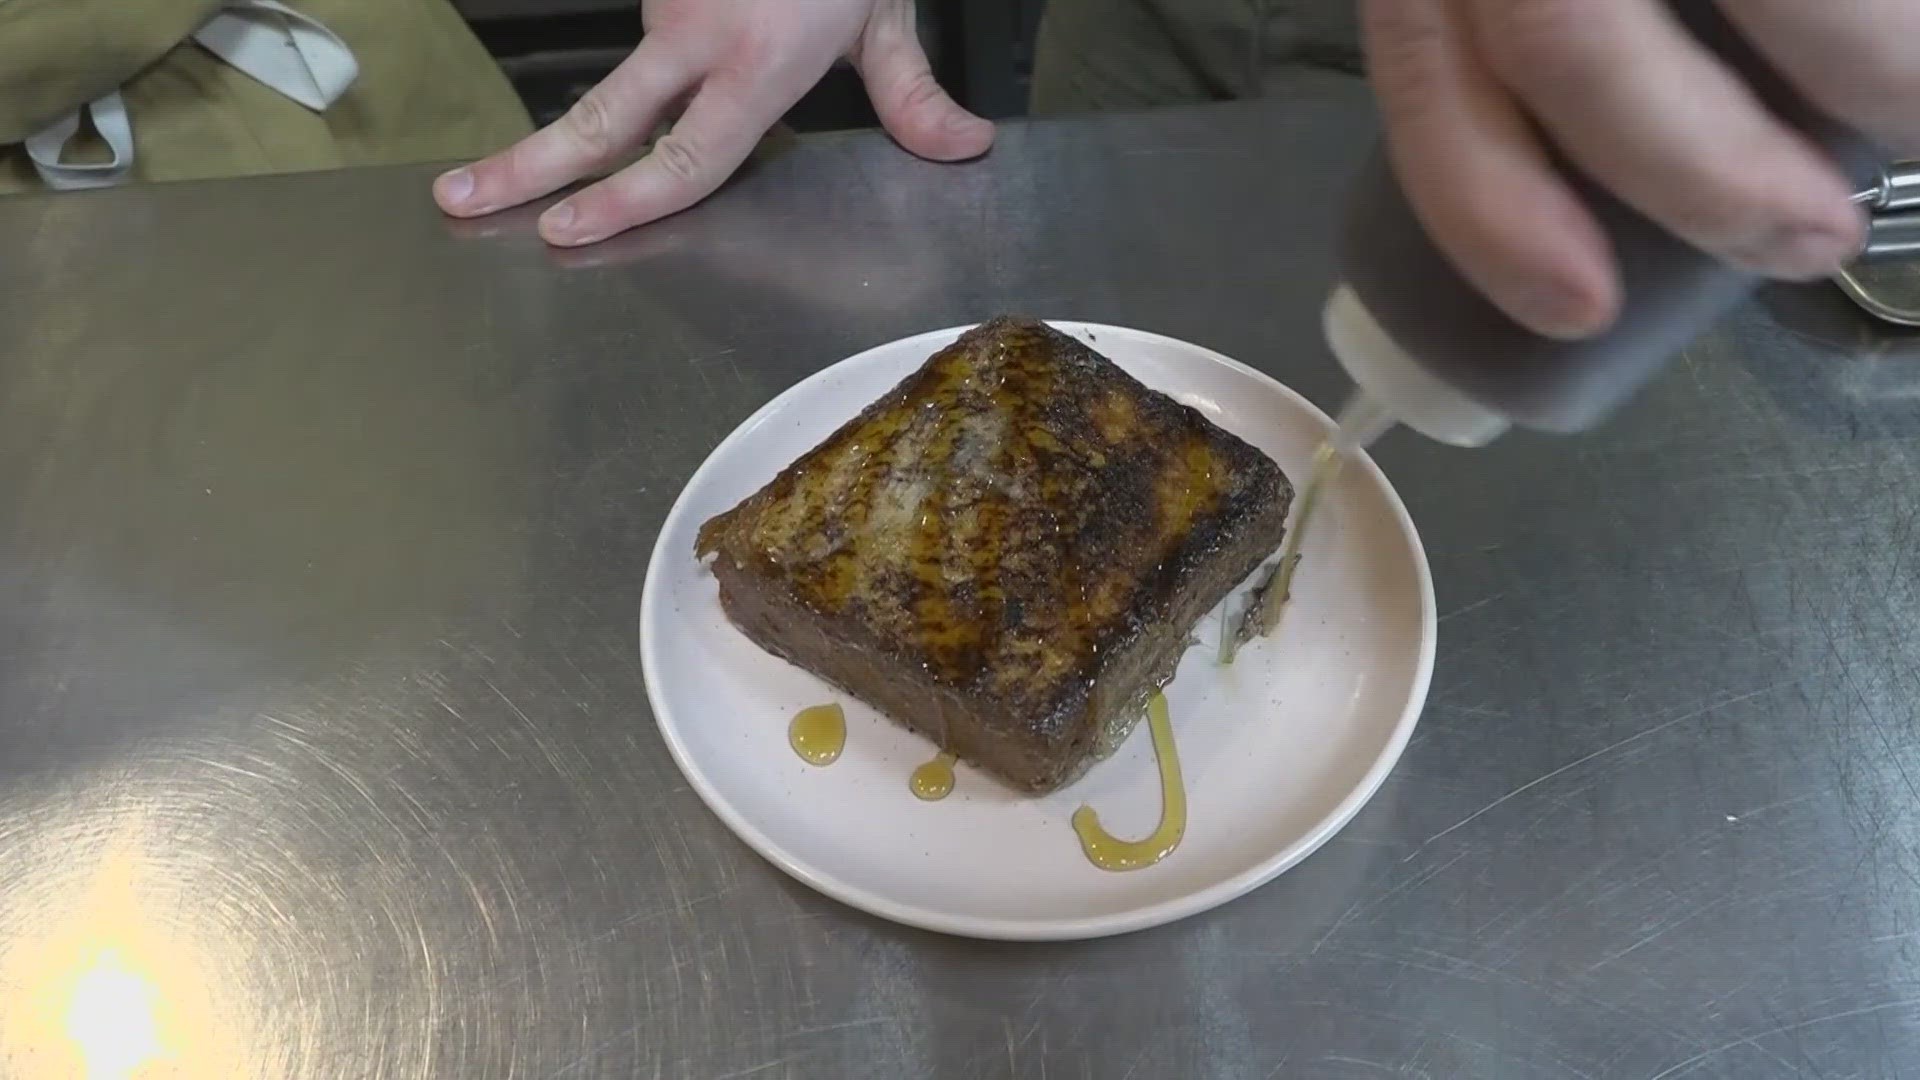 NEWS CENTER Maine's Aaron Myler learned from staff at Bread and Friends about how they make the breakfast classic for diners at the Old Port cafe.